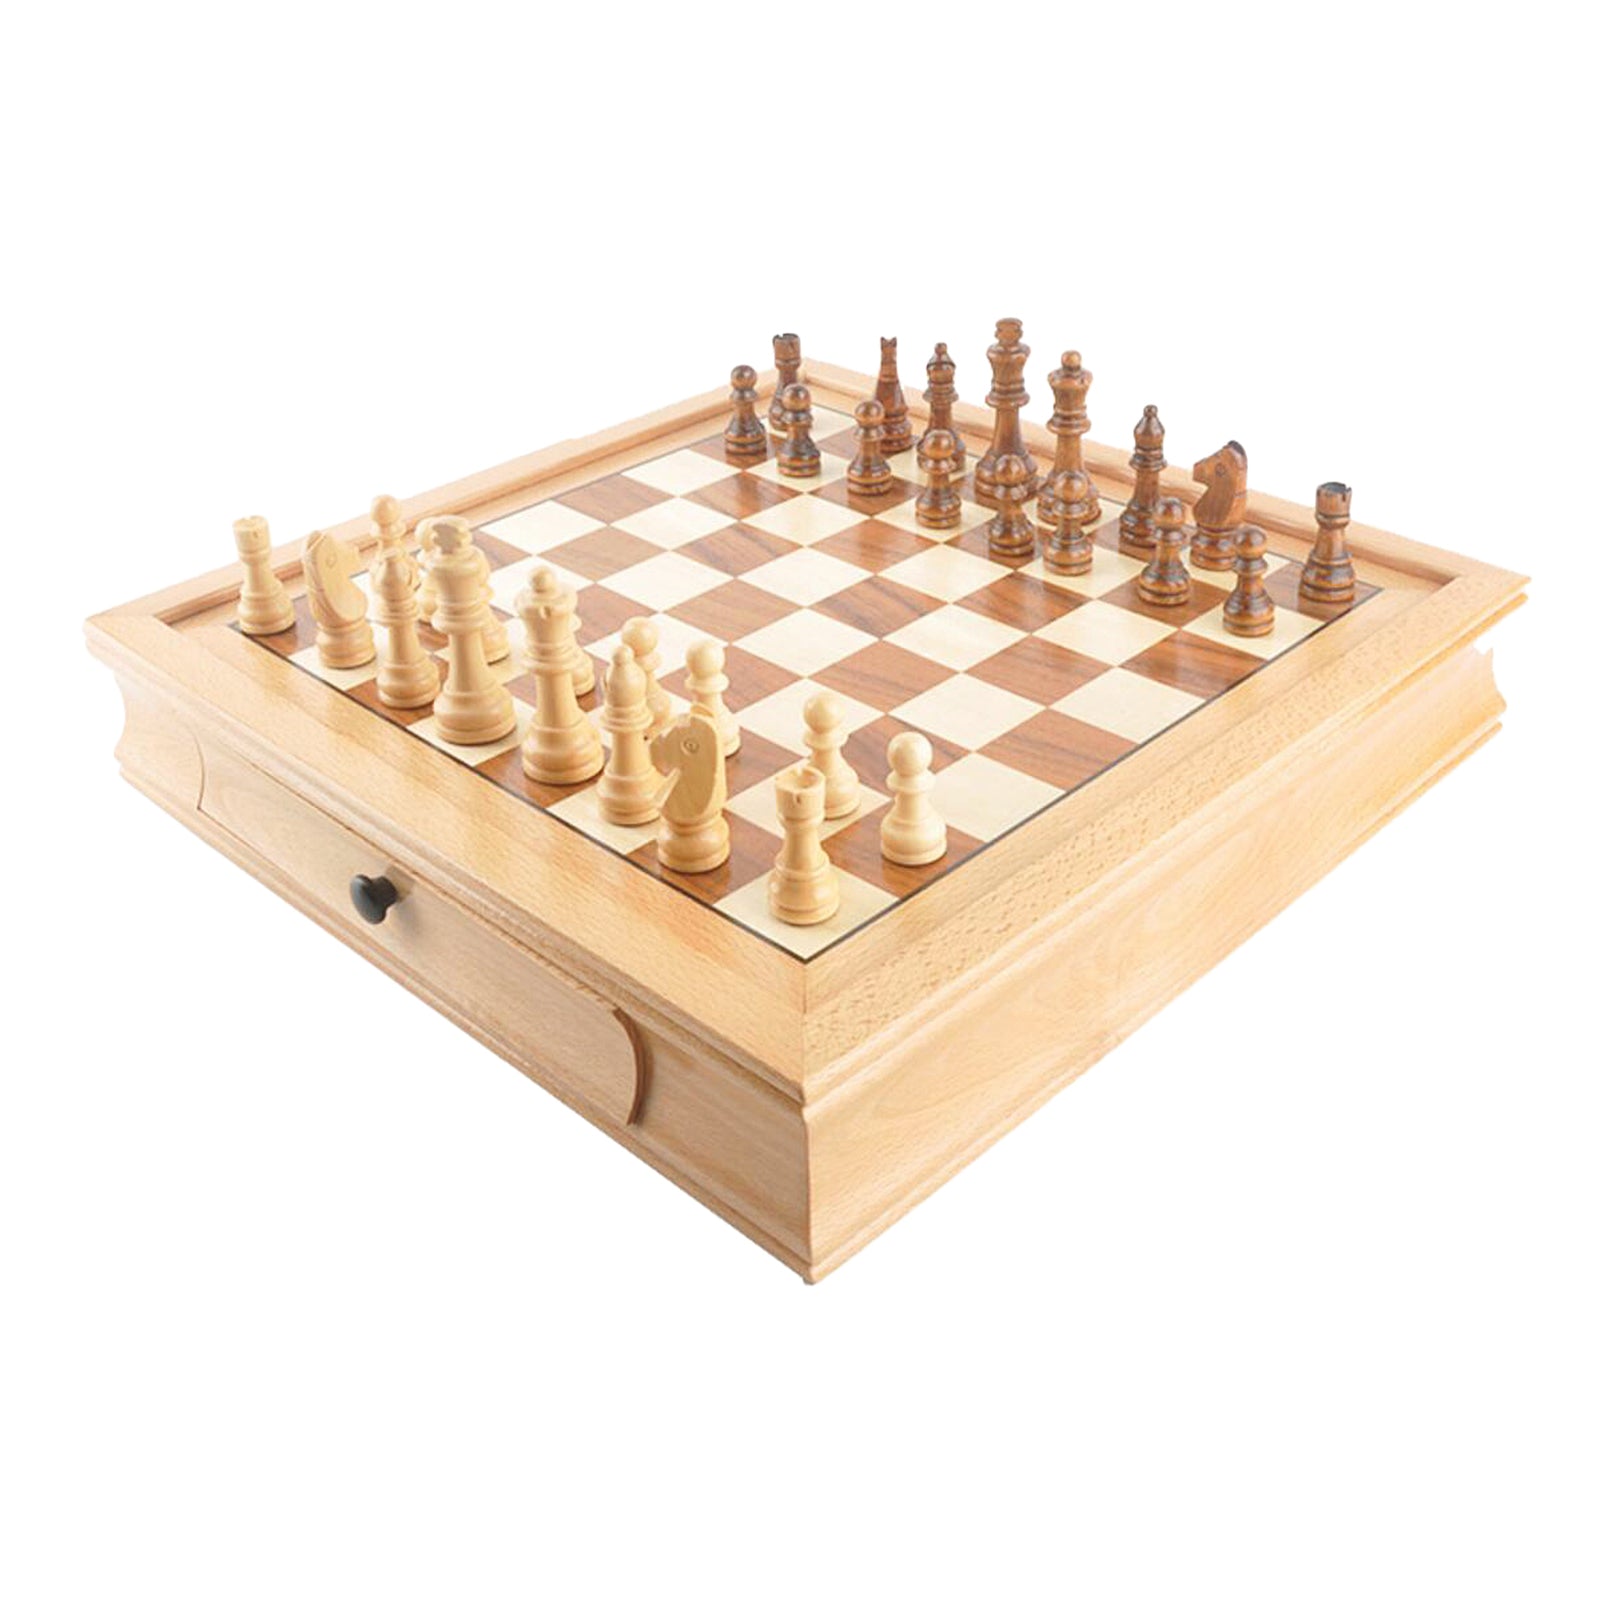 32cmx32cm Wooden Chess Walnut Wood Storage Drawer Board Game for Kids Toy